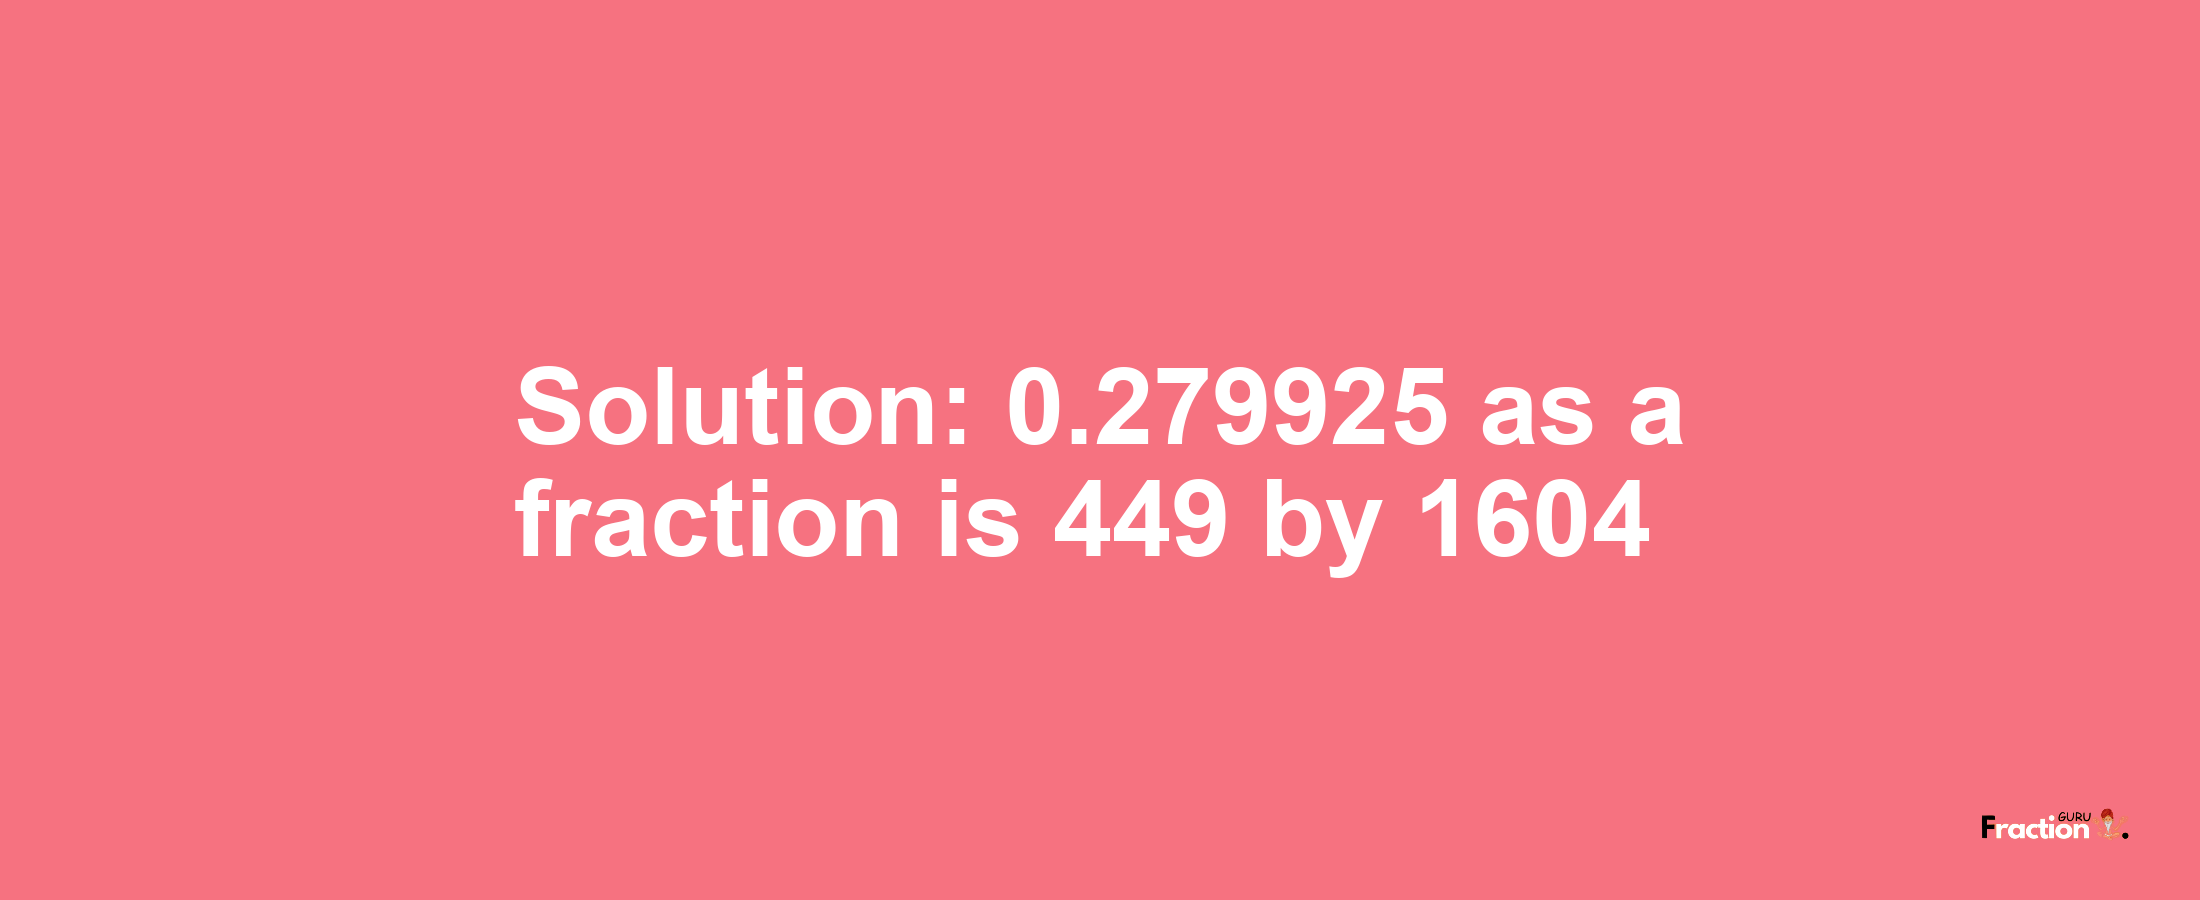 Solution:0.279925 as a fraction is 449/1604